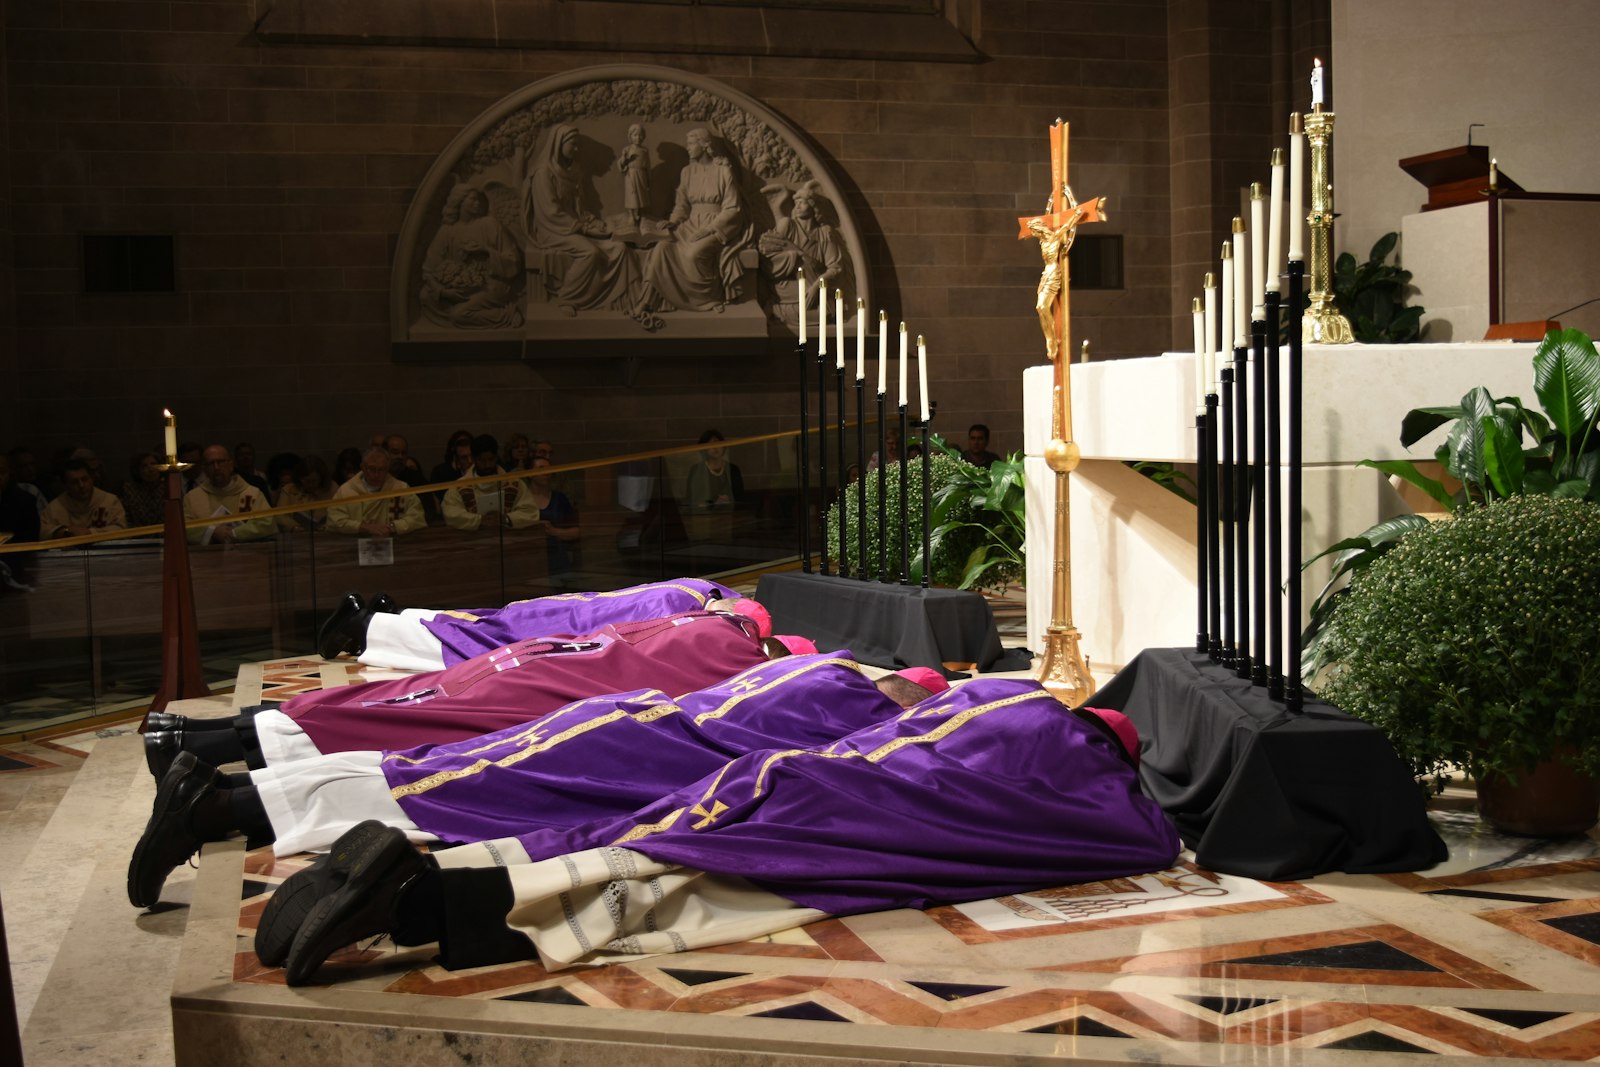 Archbishop Allen H. Vigneron and Detroit's auxiliary bishops lie prostrate before the altar at the Cathedral of the Most Blessed Sacrament during a Mass for Pardon in October 2016. The Mass, which served as a precursor to the synod, asked God to forgive the Church and its leaders for ways in which the Gospel had been hindered by sin, inaction and indifference. (Daniel Meloy | Detroit Catholic)